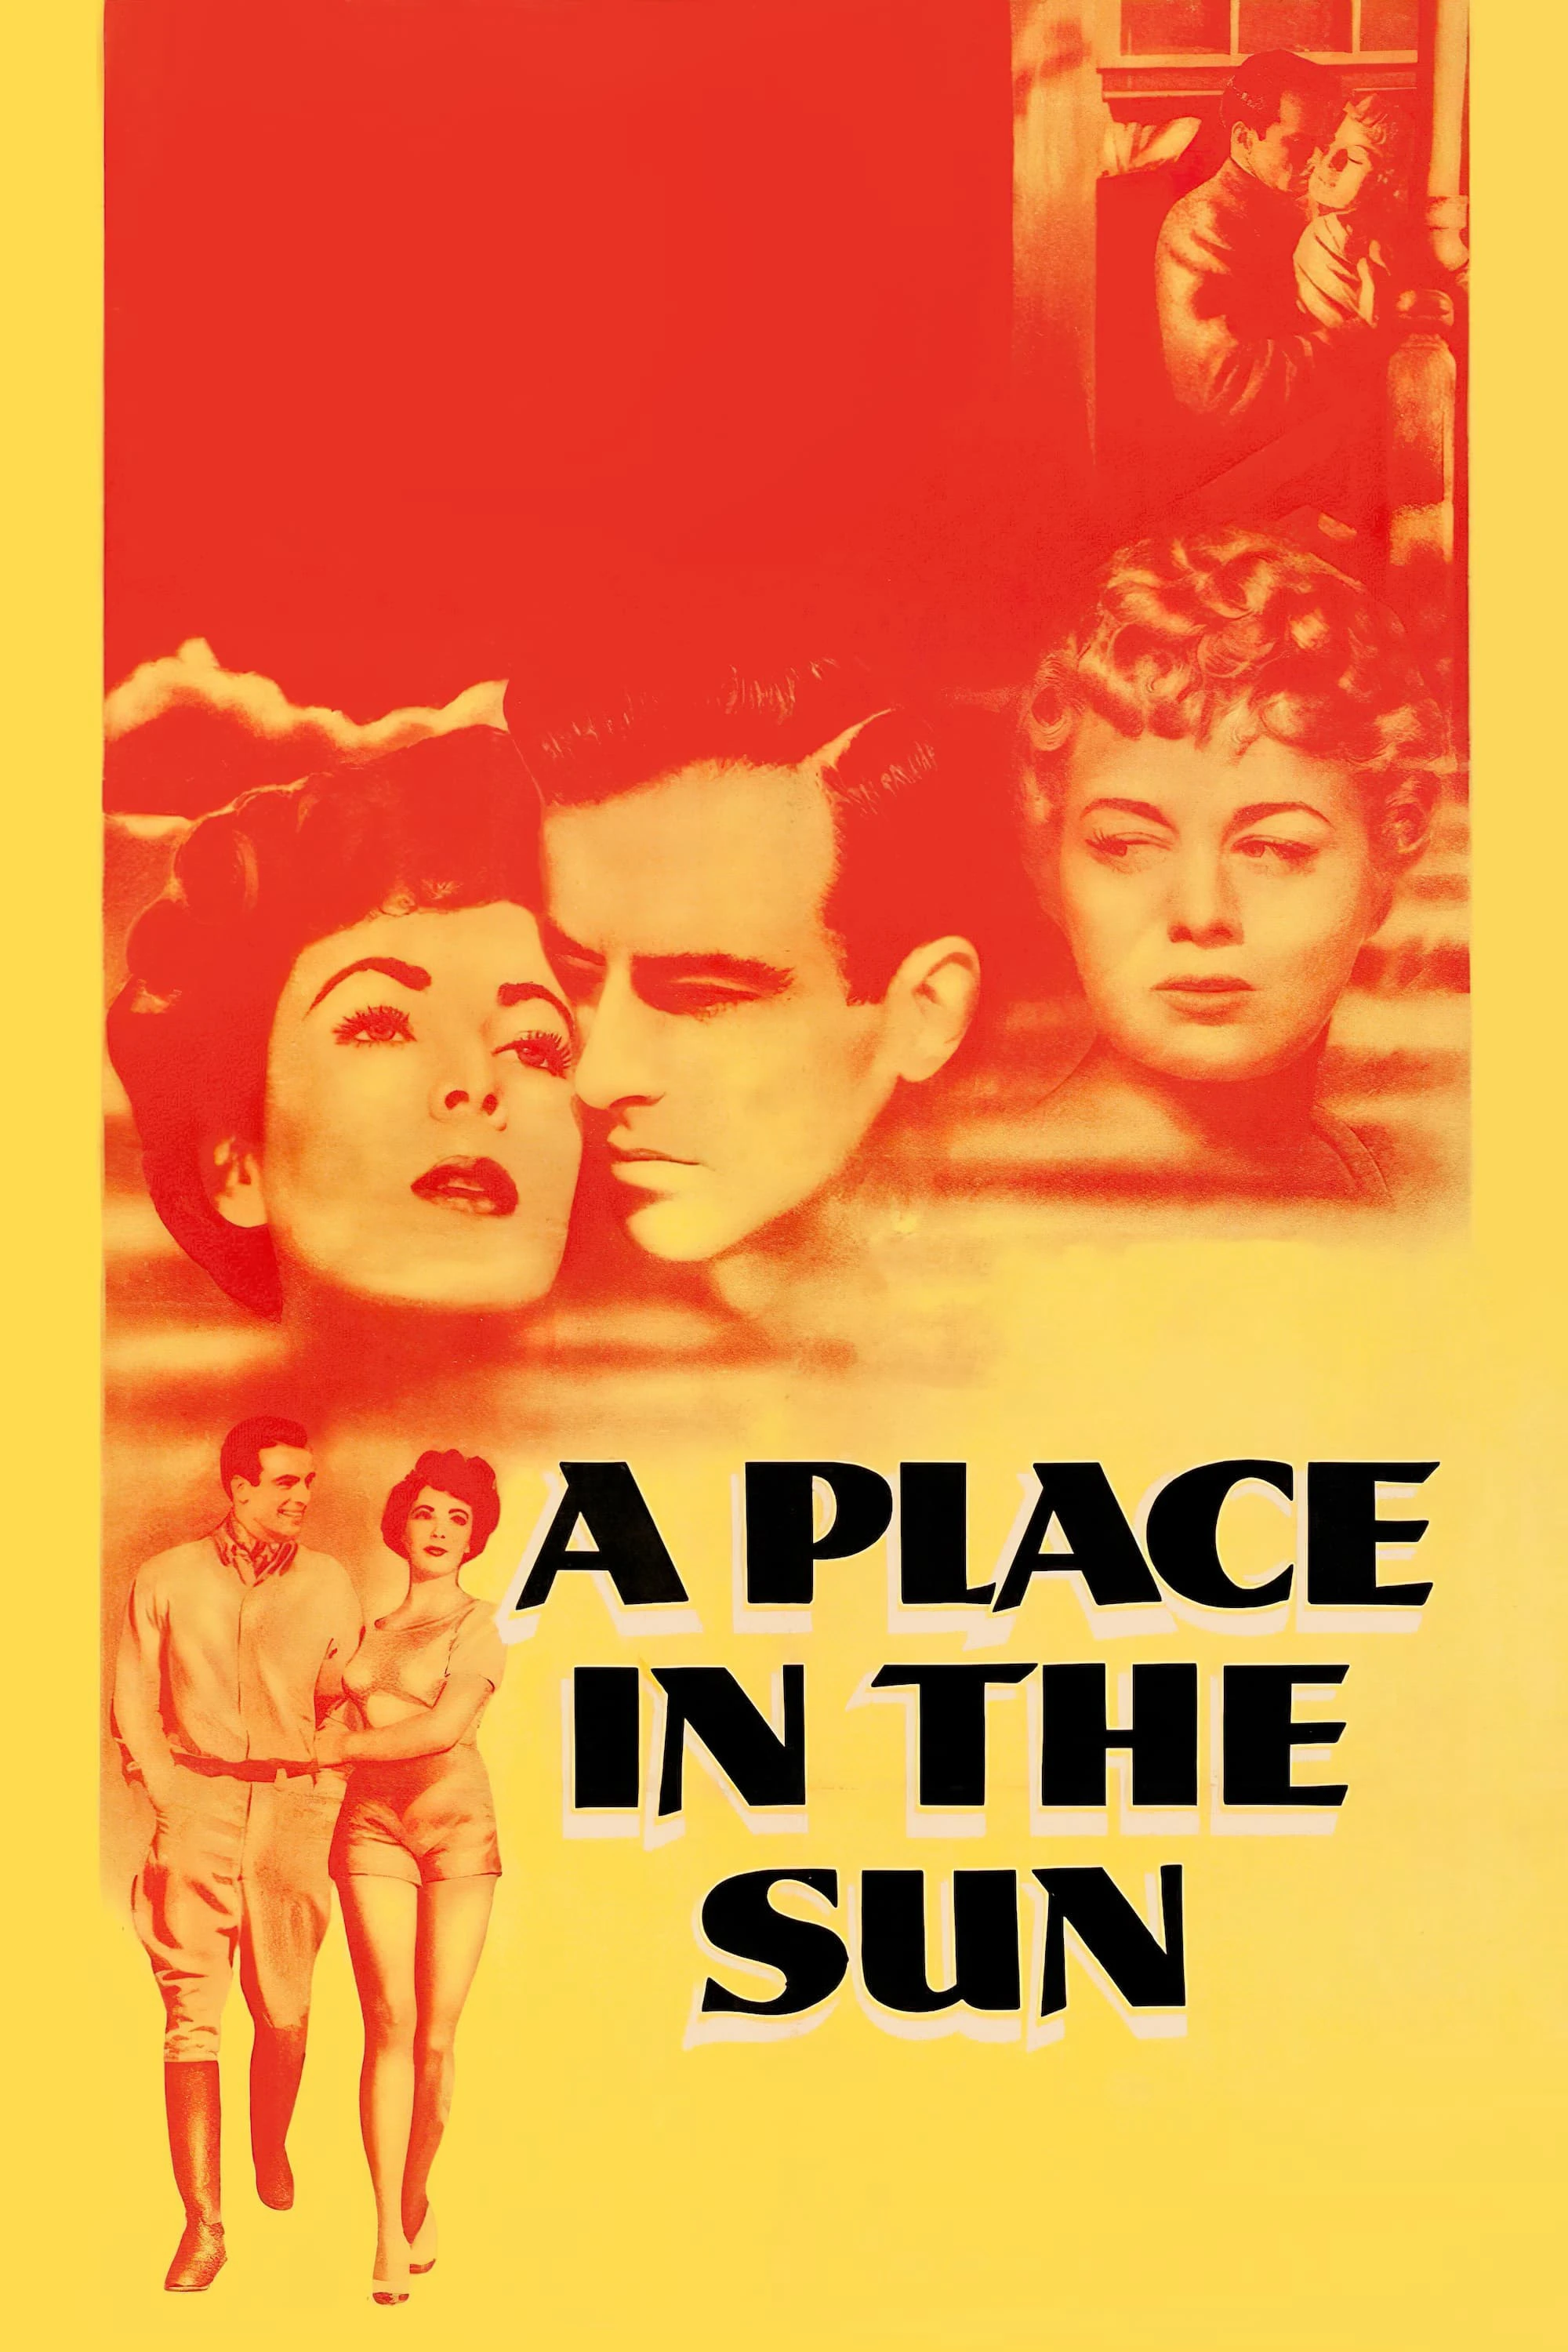 A Place in the Sun | A Place in the Sun (1951)